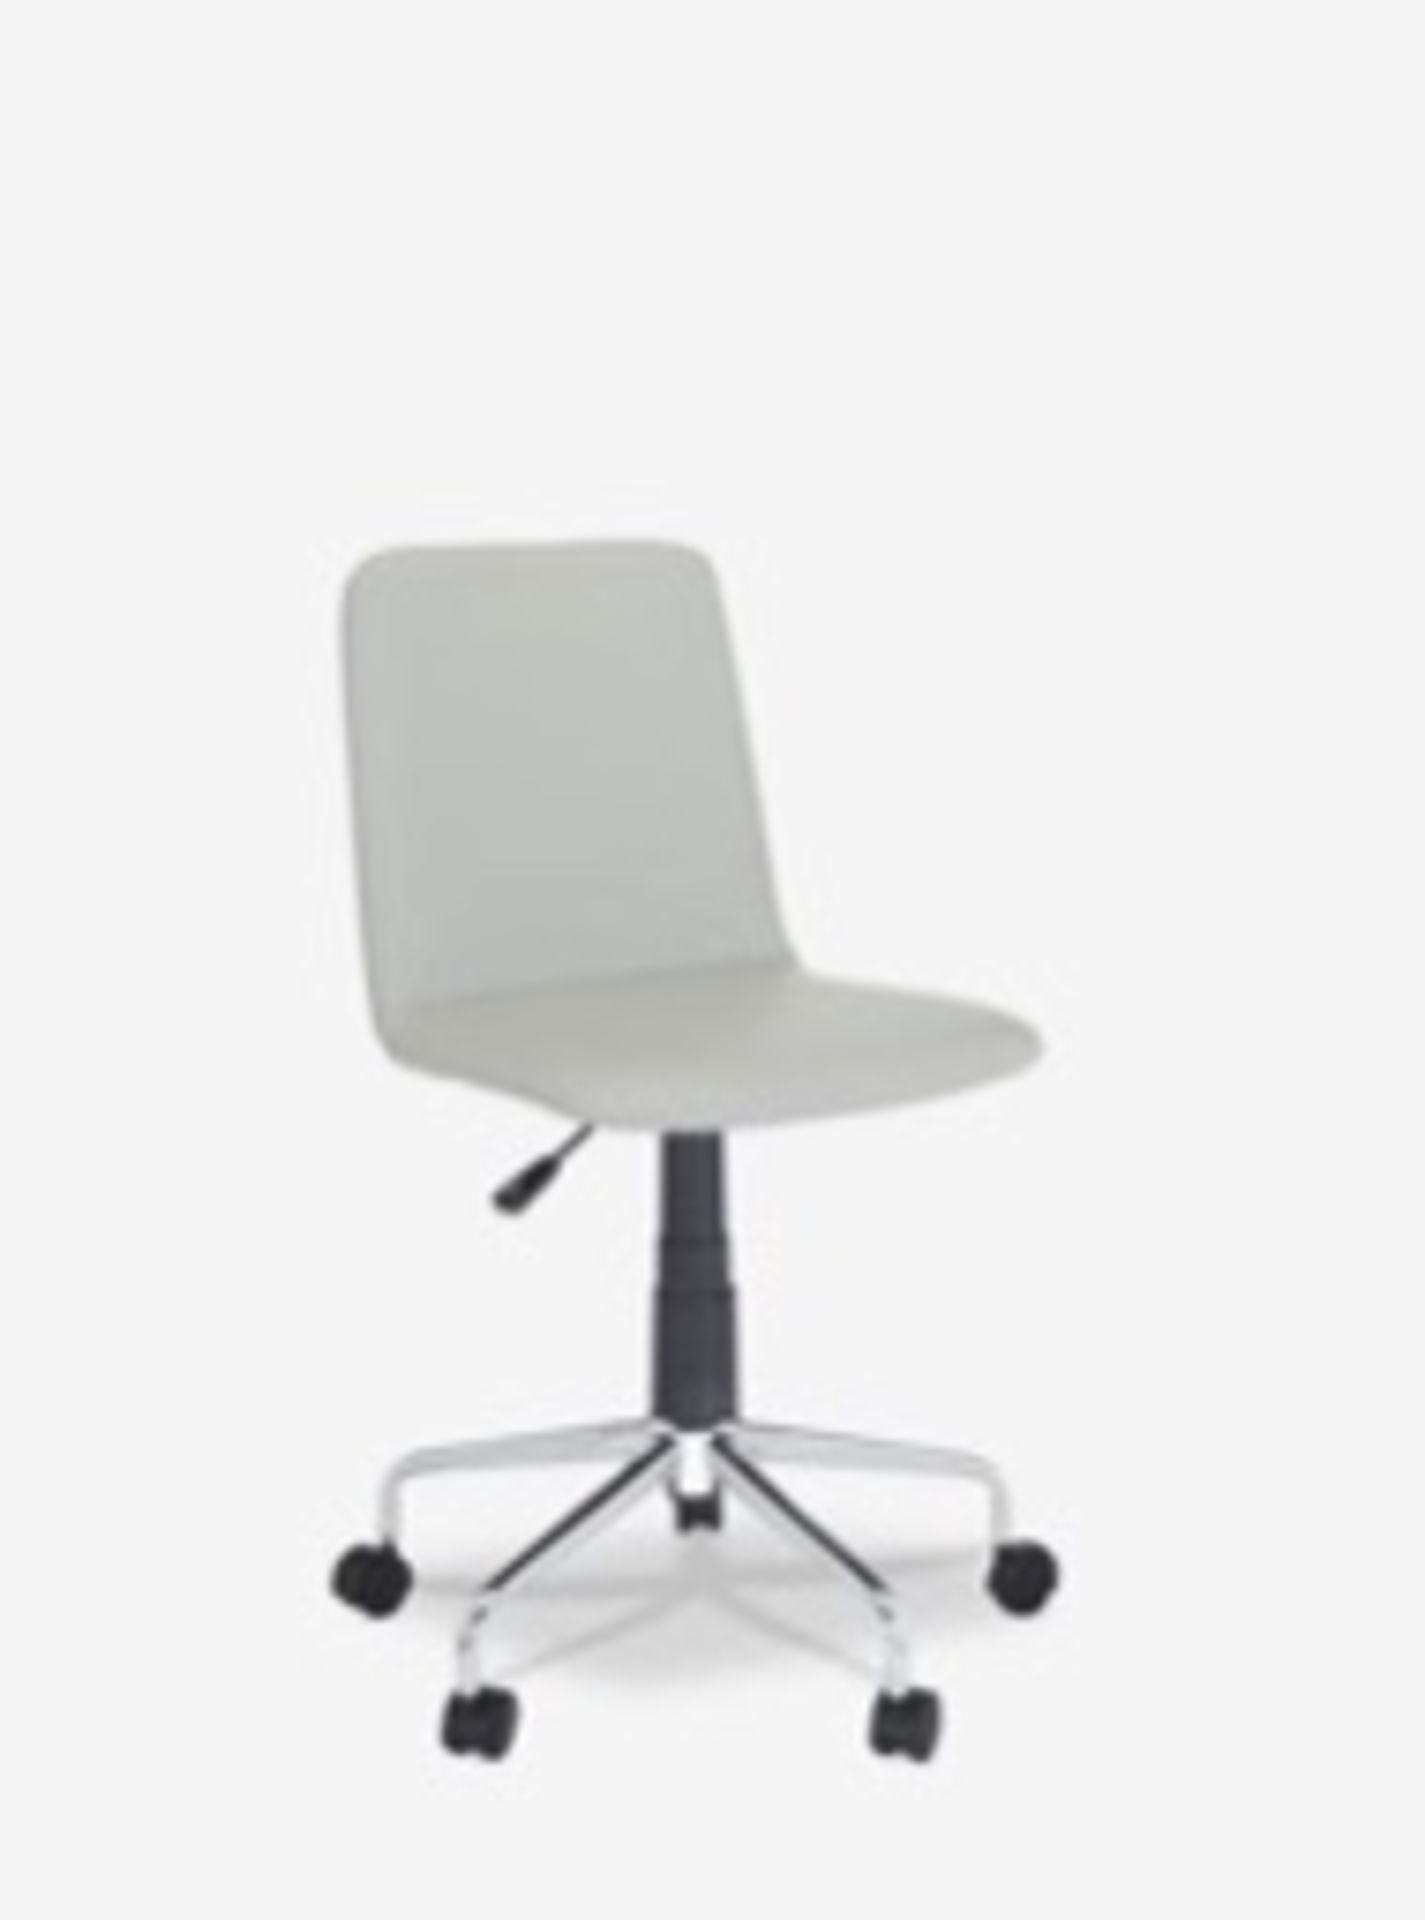 John Lewis ANYDAY Nova Office Chair - Grading Info Goods are faulty Faulty gas lift RRP £79